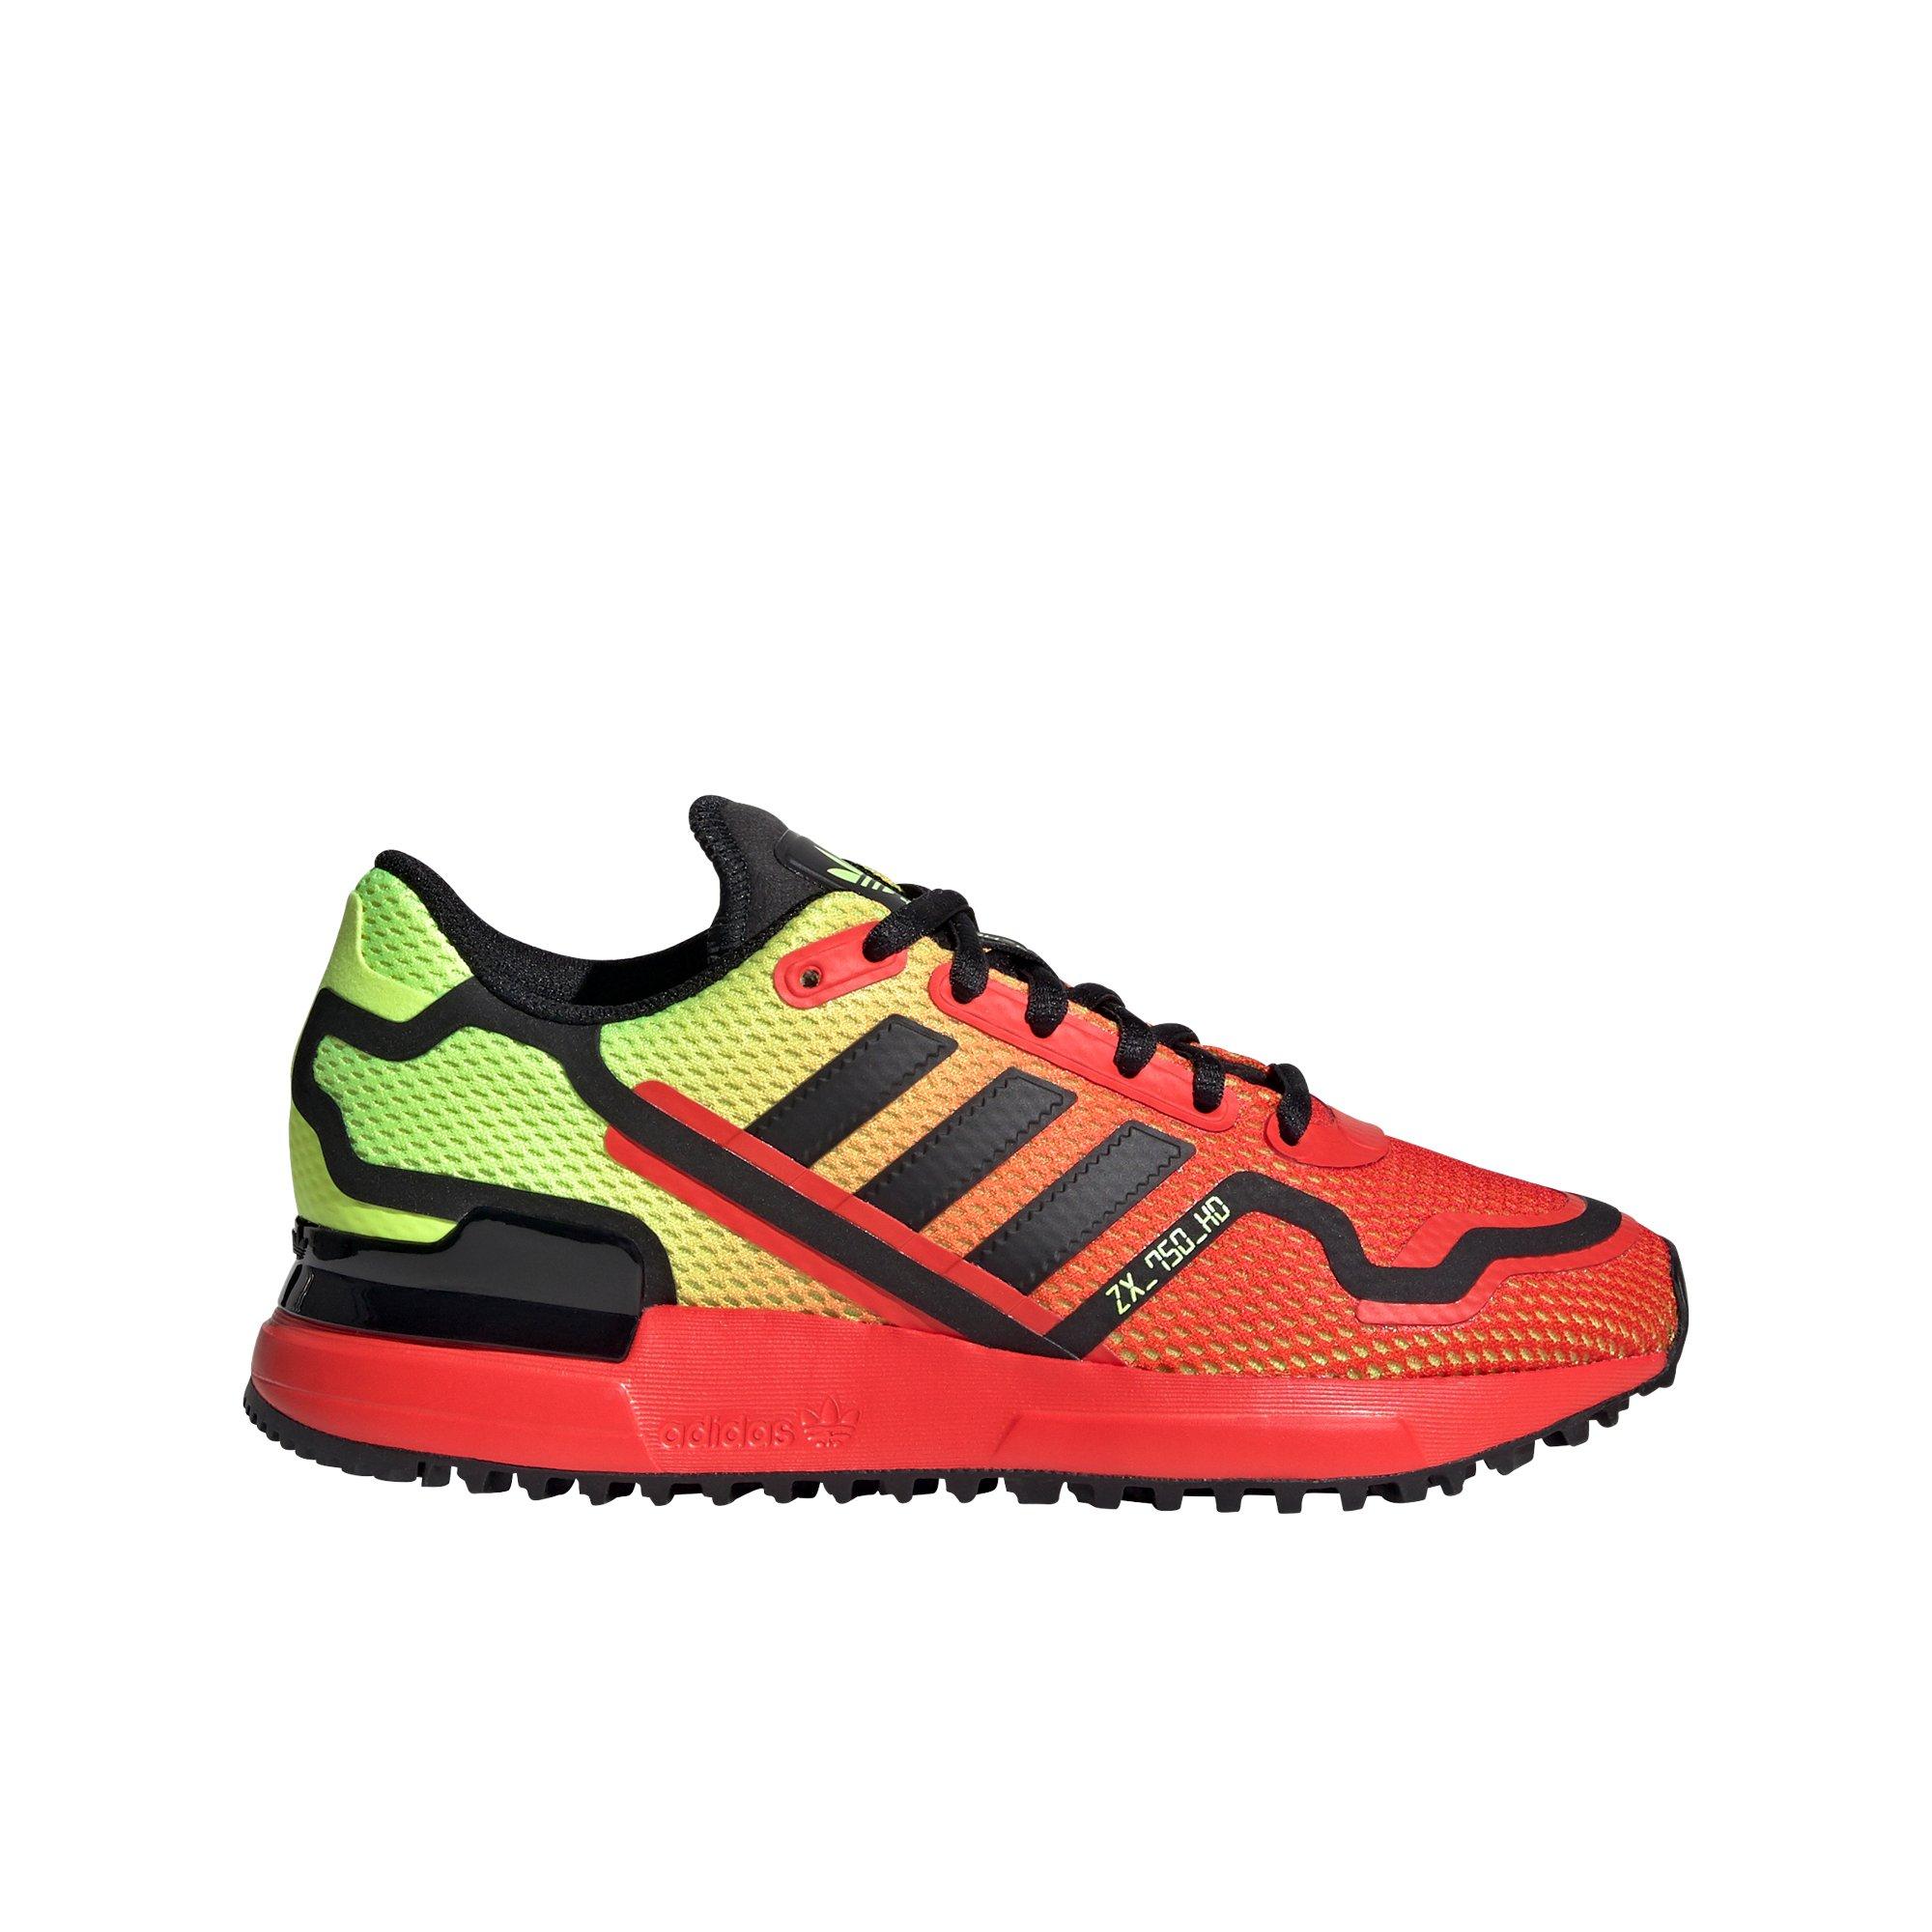 zx 750 hd shoes review